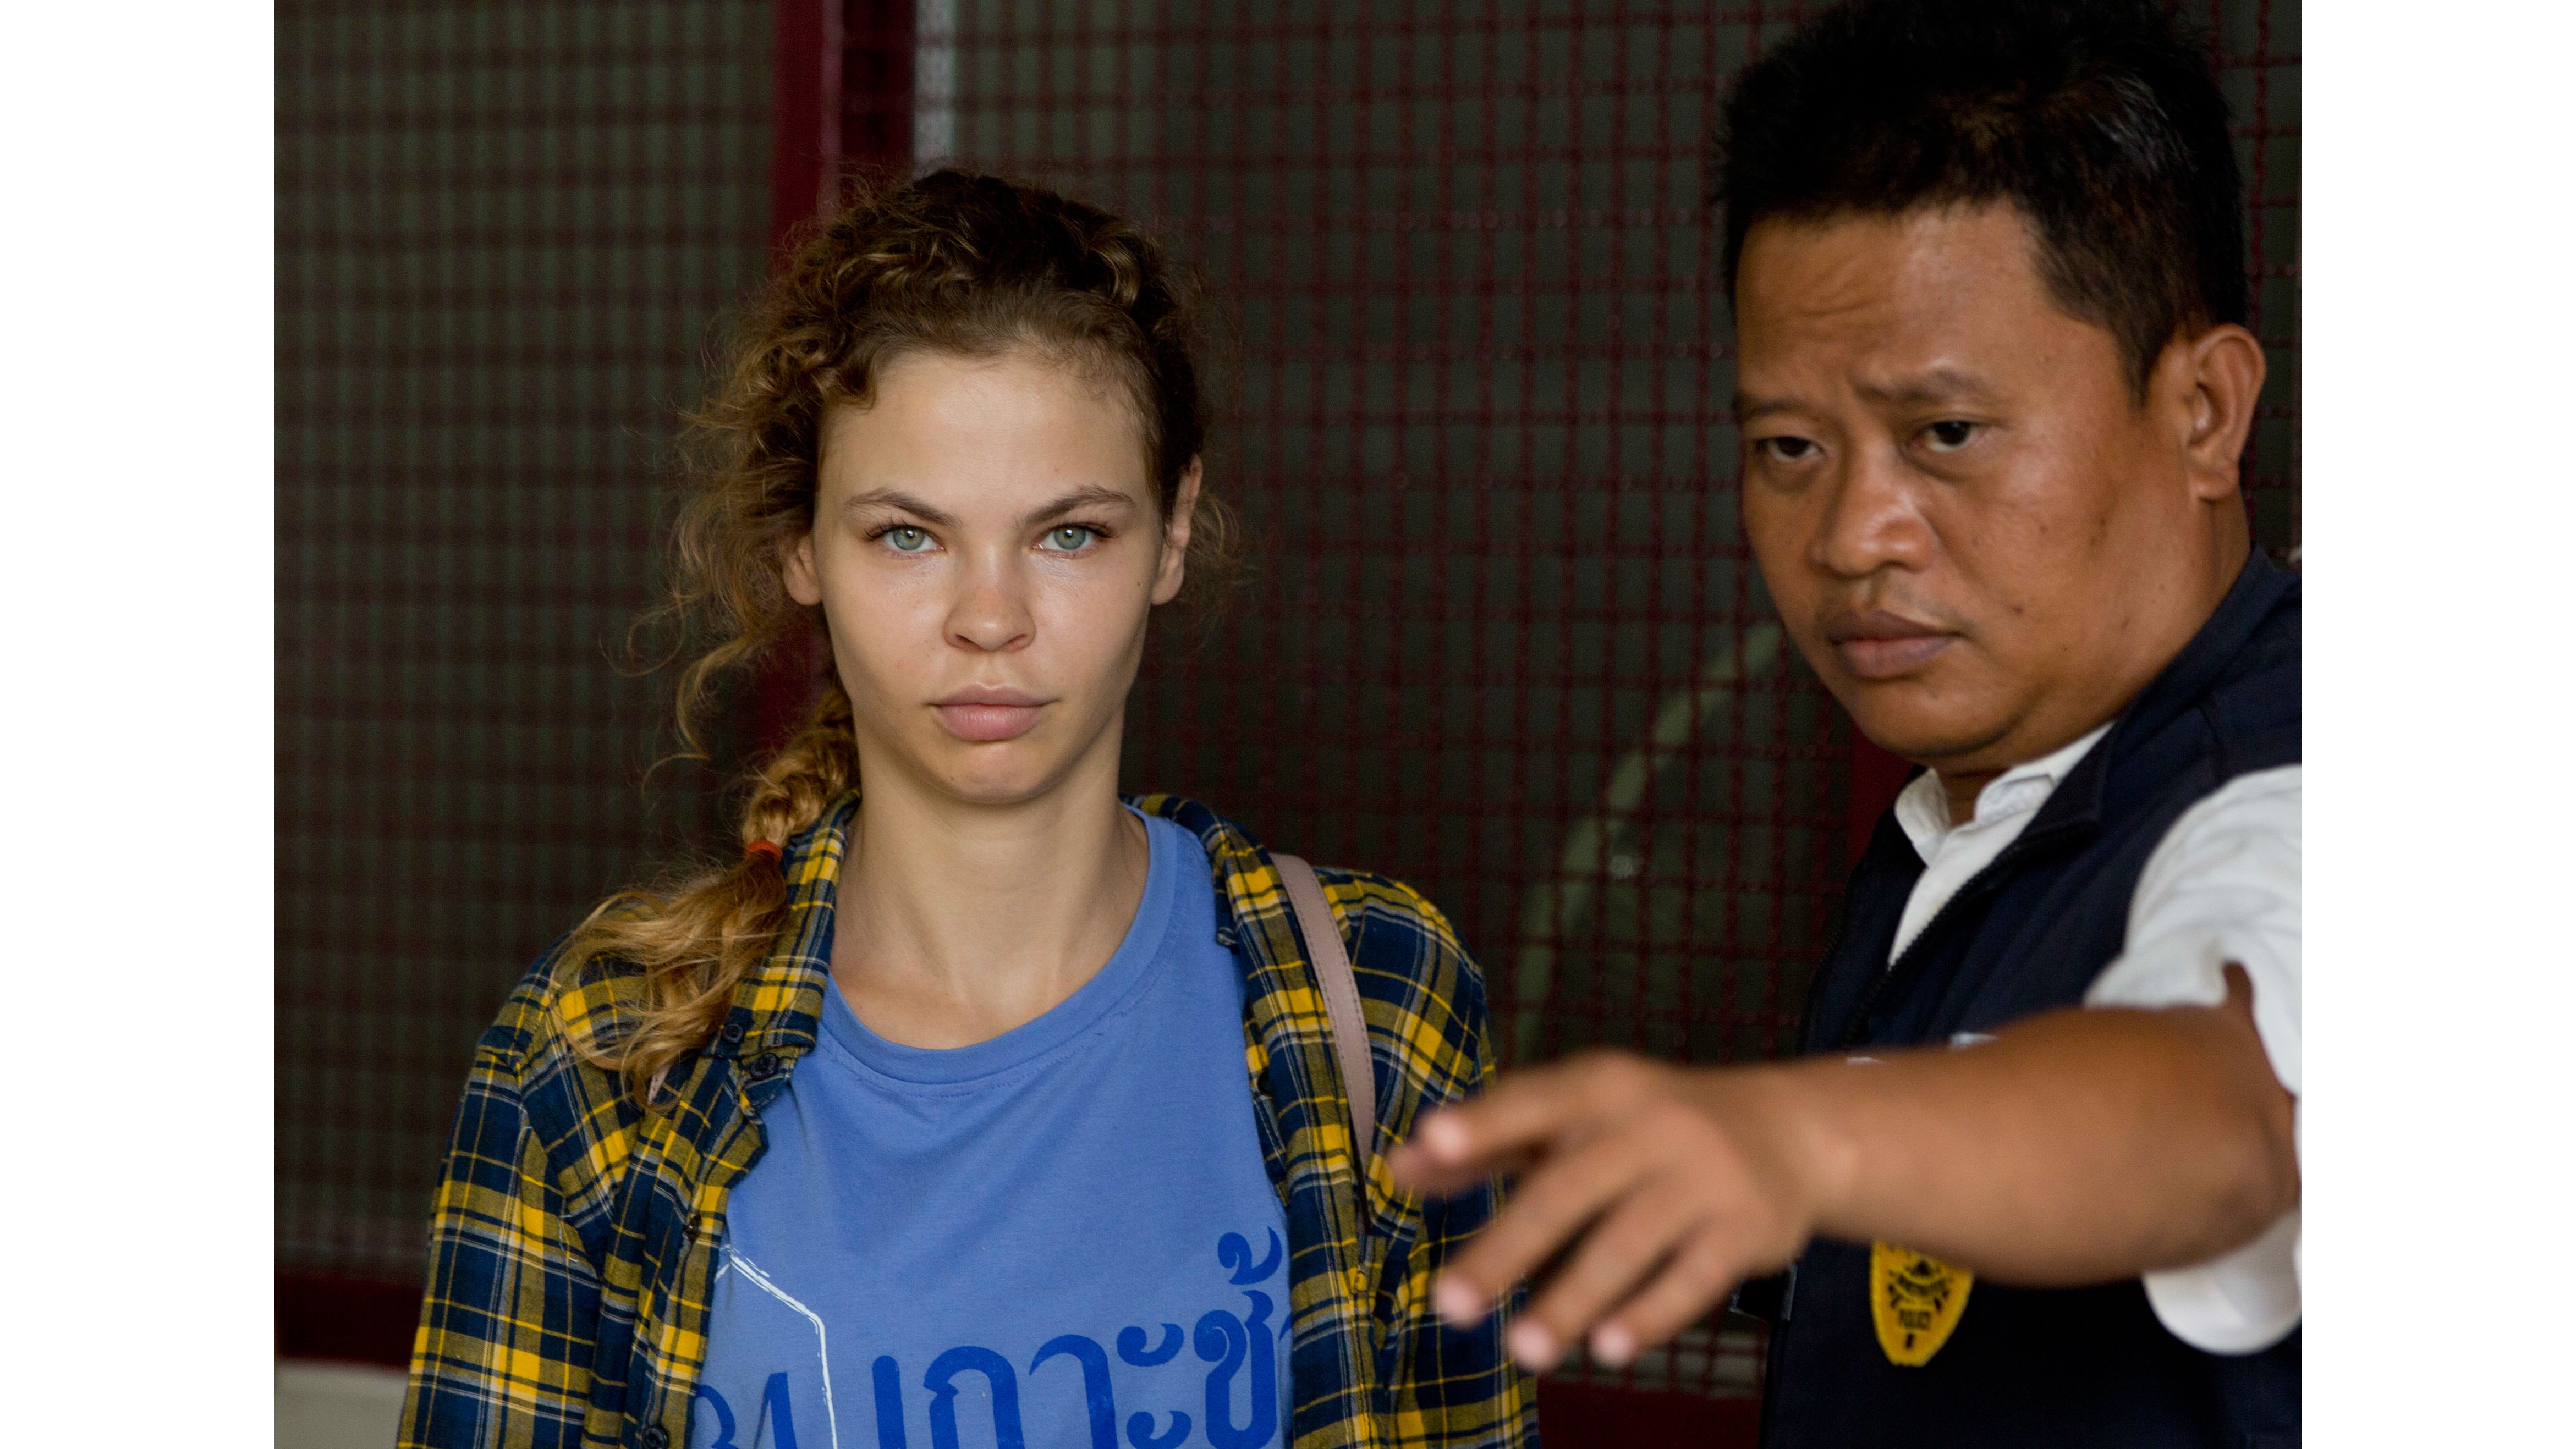 A police officer escorts Anastasia Vashukevich from a detention center in Pattaya, south of Bangkok, Thailand, Wednesday, Feb. 28, 2018.